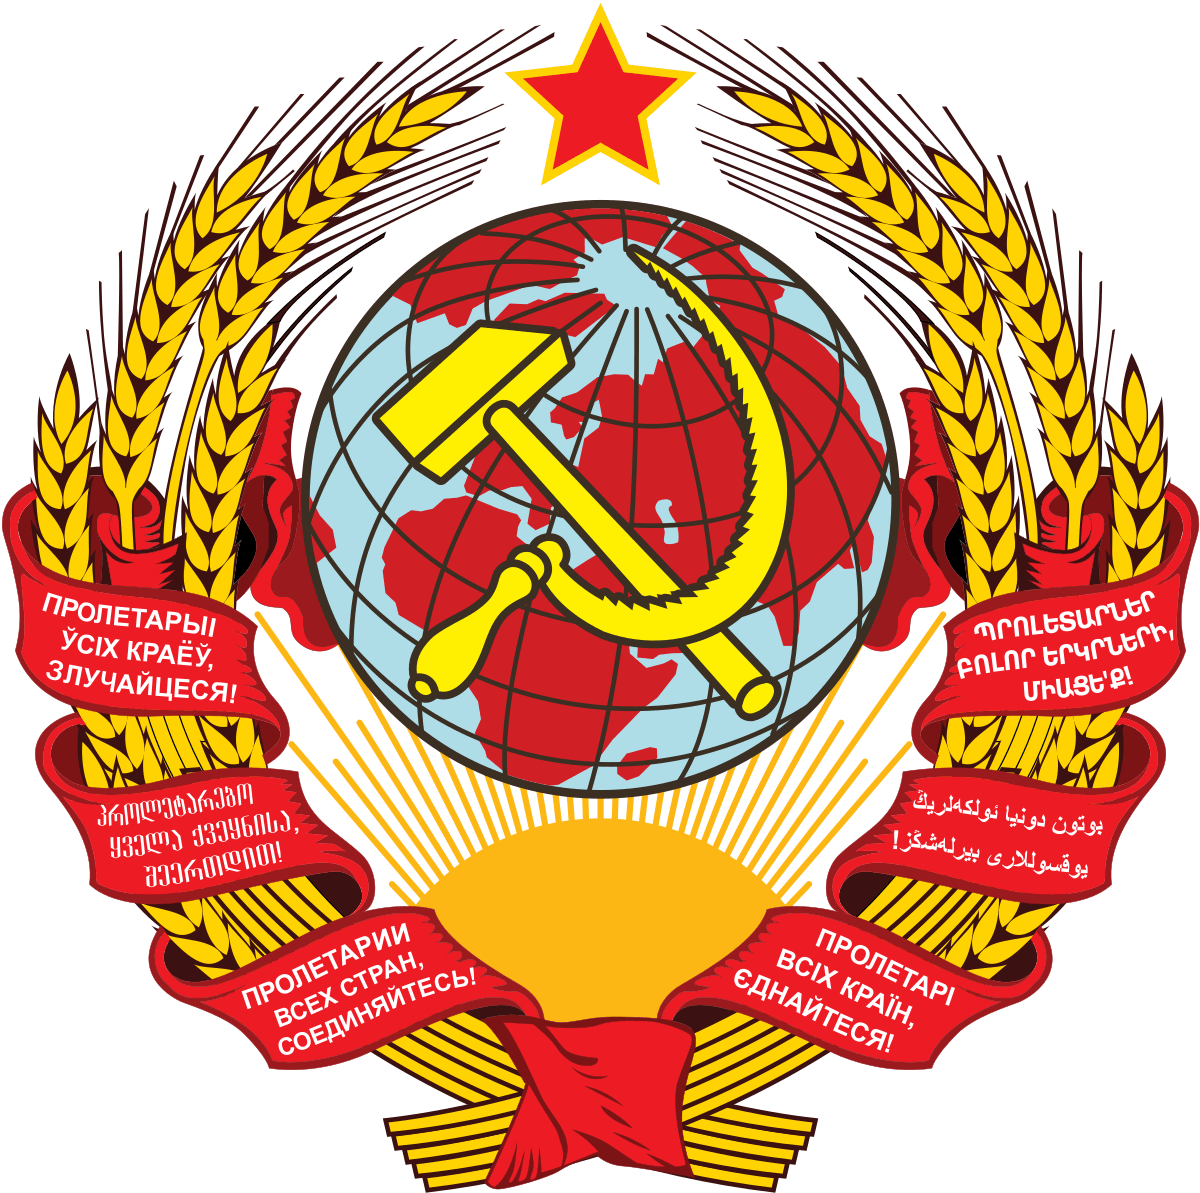 Soviet Union Logo - Central Executive Committee of the Soviet Union